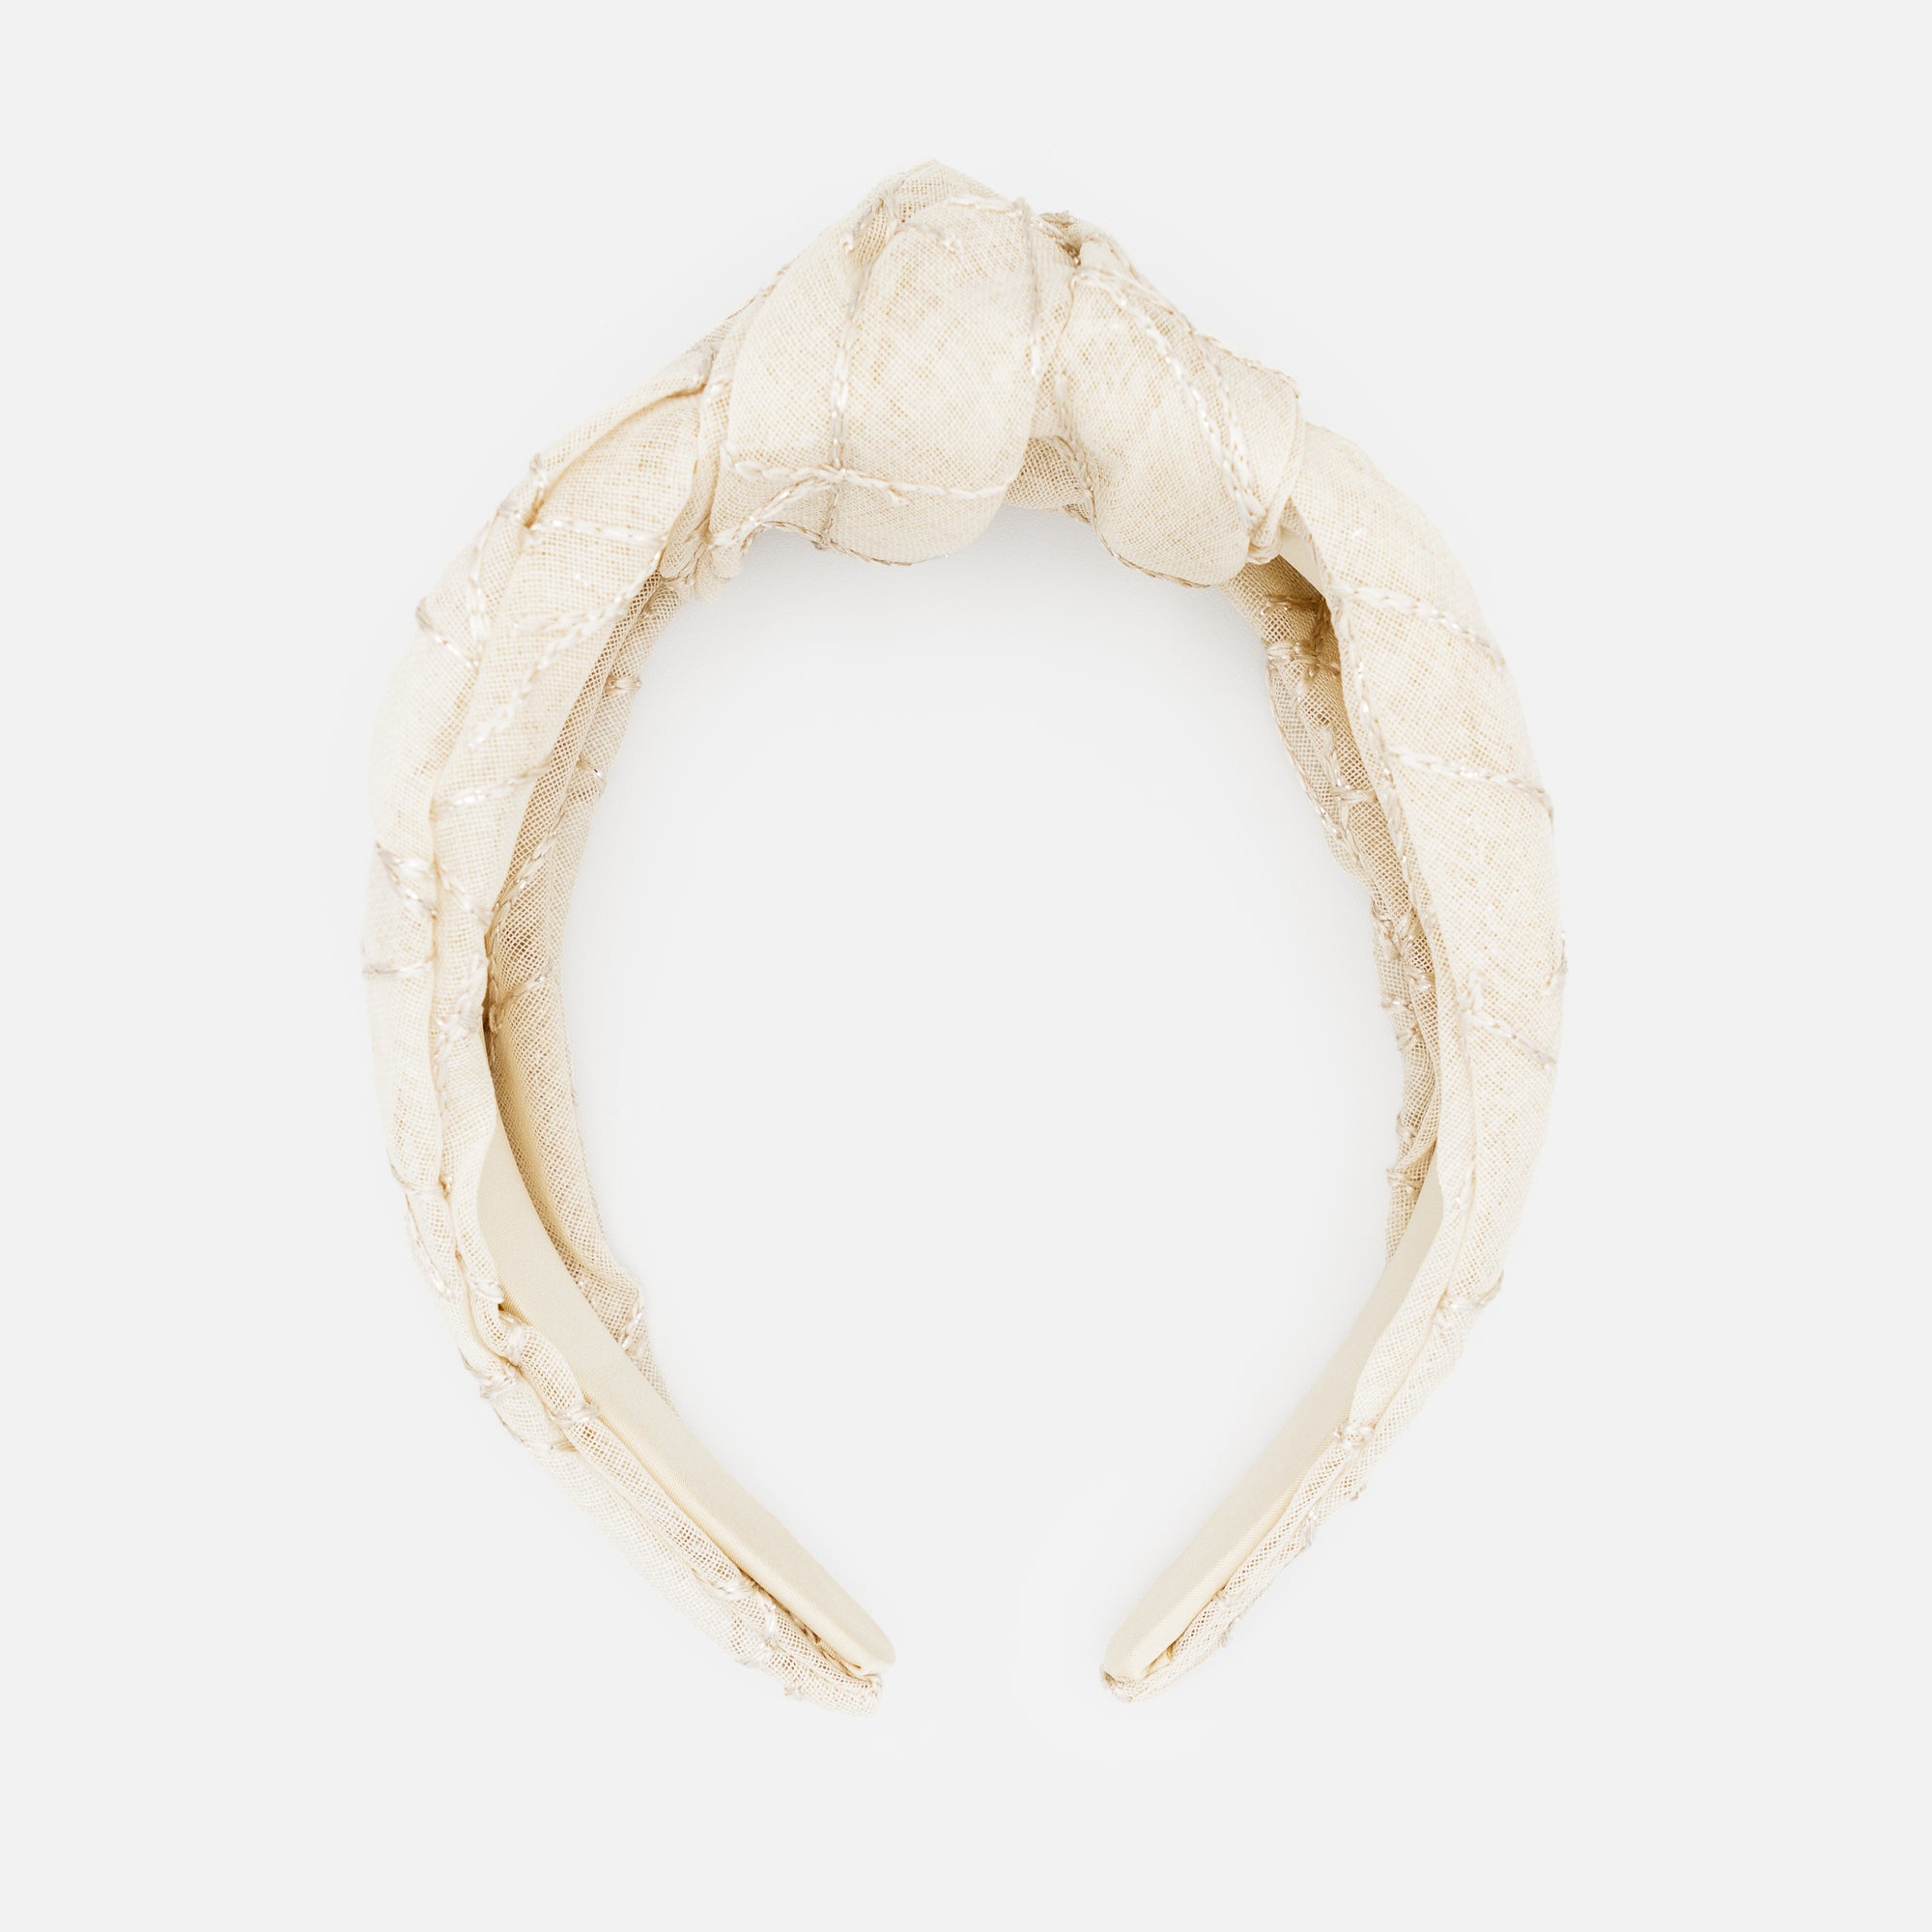 Beige headband with knot and linear embroidery